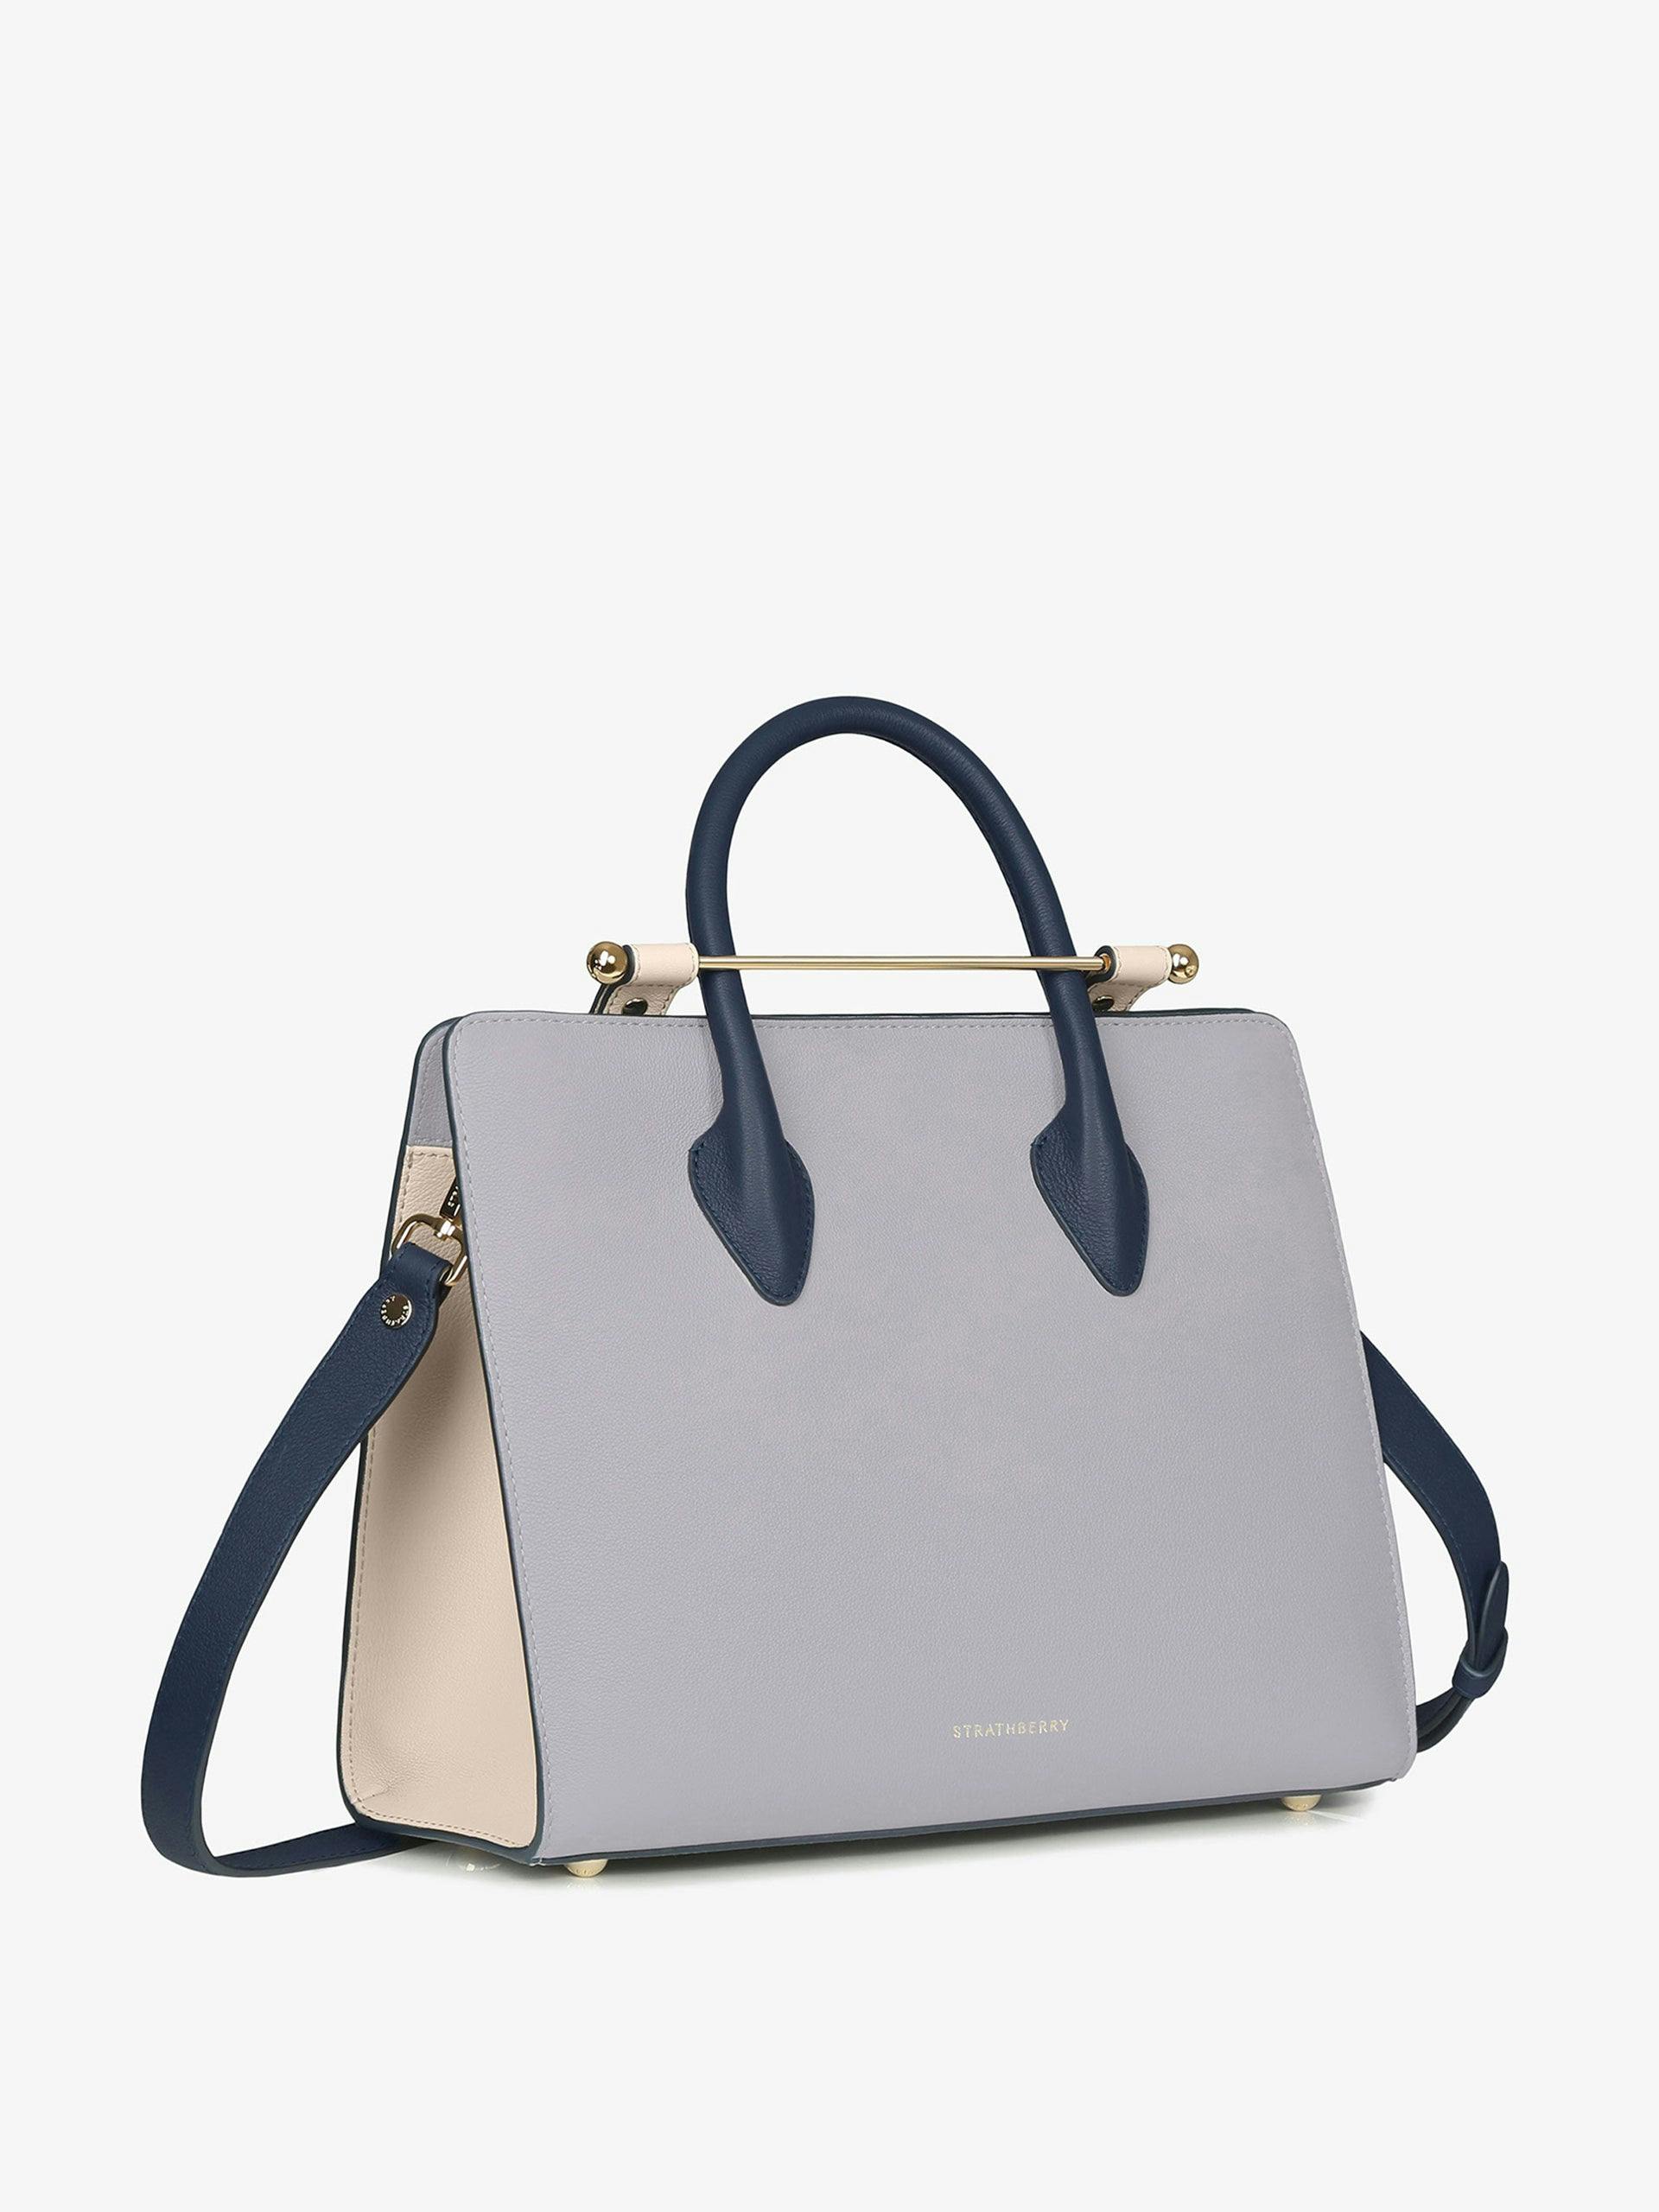 Frost grey, oat and navy Strathberry midi tote bag